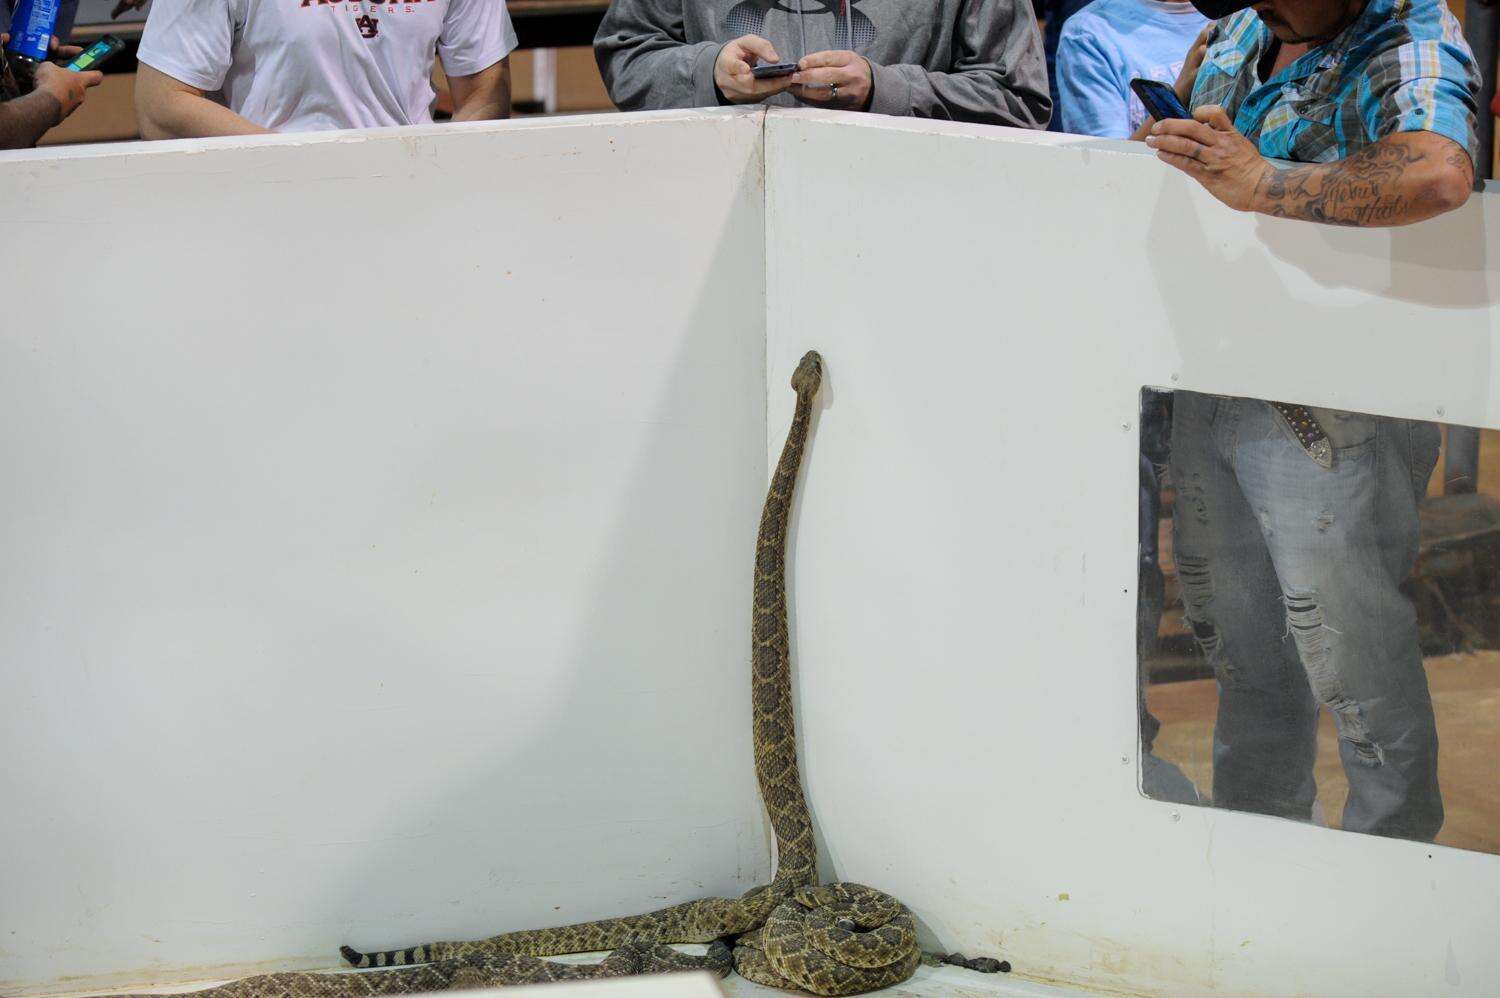 A rattlesnake in the holding pit at the Sweetwater snake roundup festival